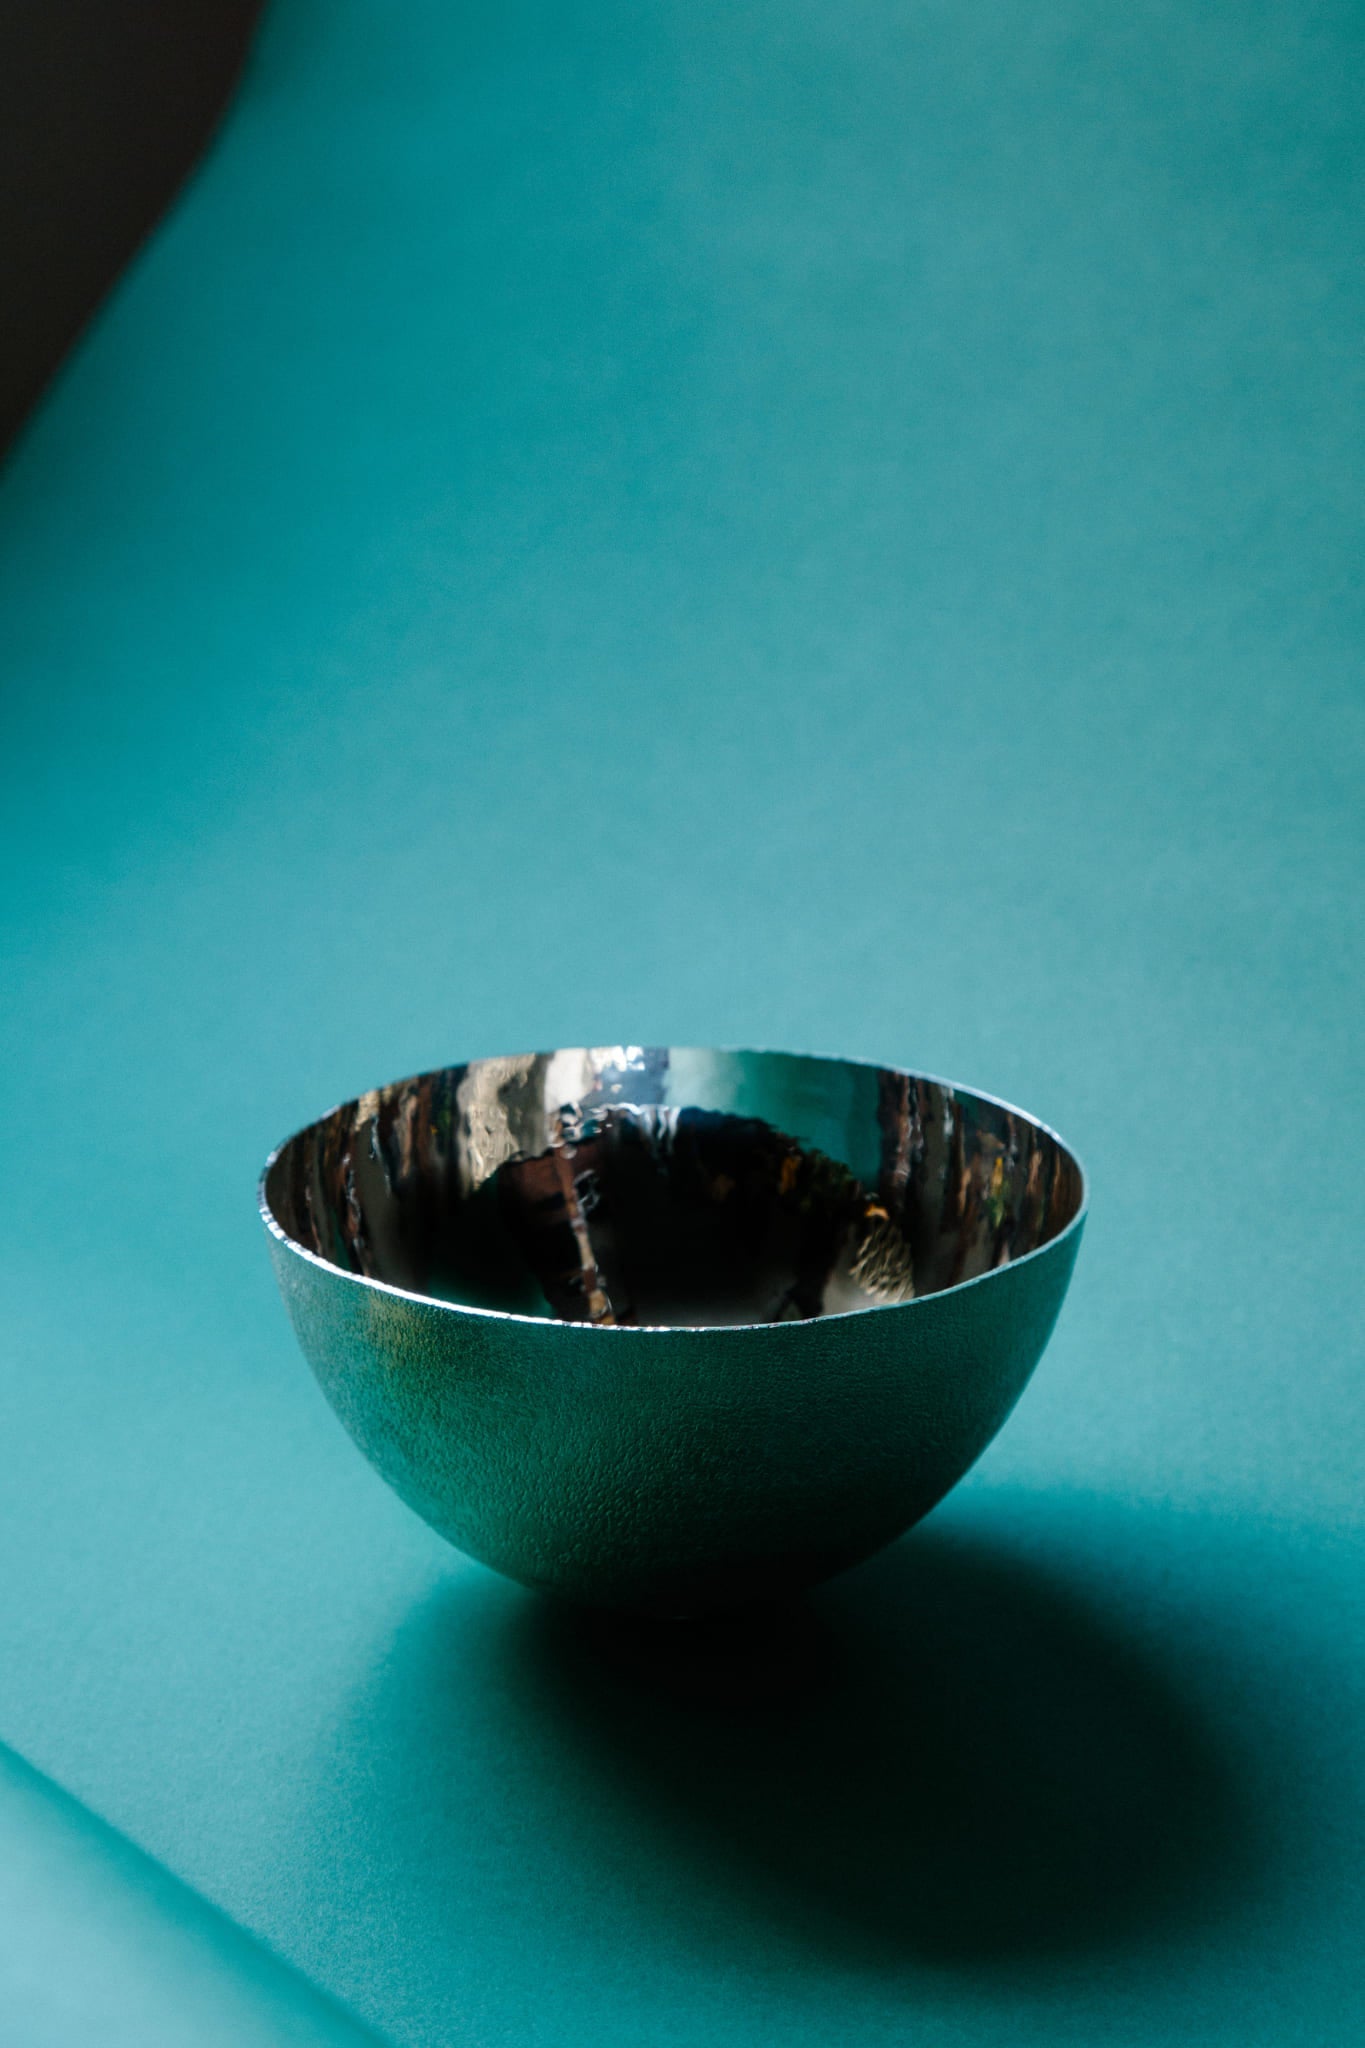 Hand-raised sterling silver bowl. Textured outer with a highly reflective inner surface. Beautifully delicate yet bold. Shot on a deep green paper backdrop.